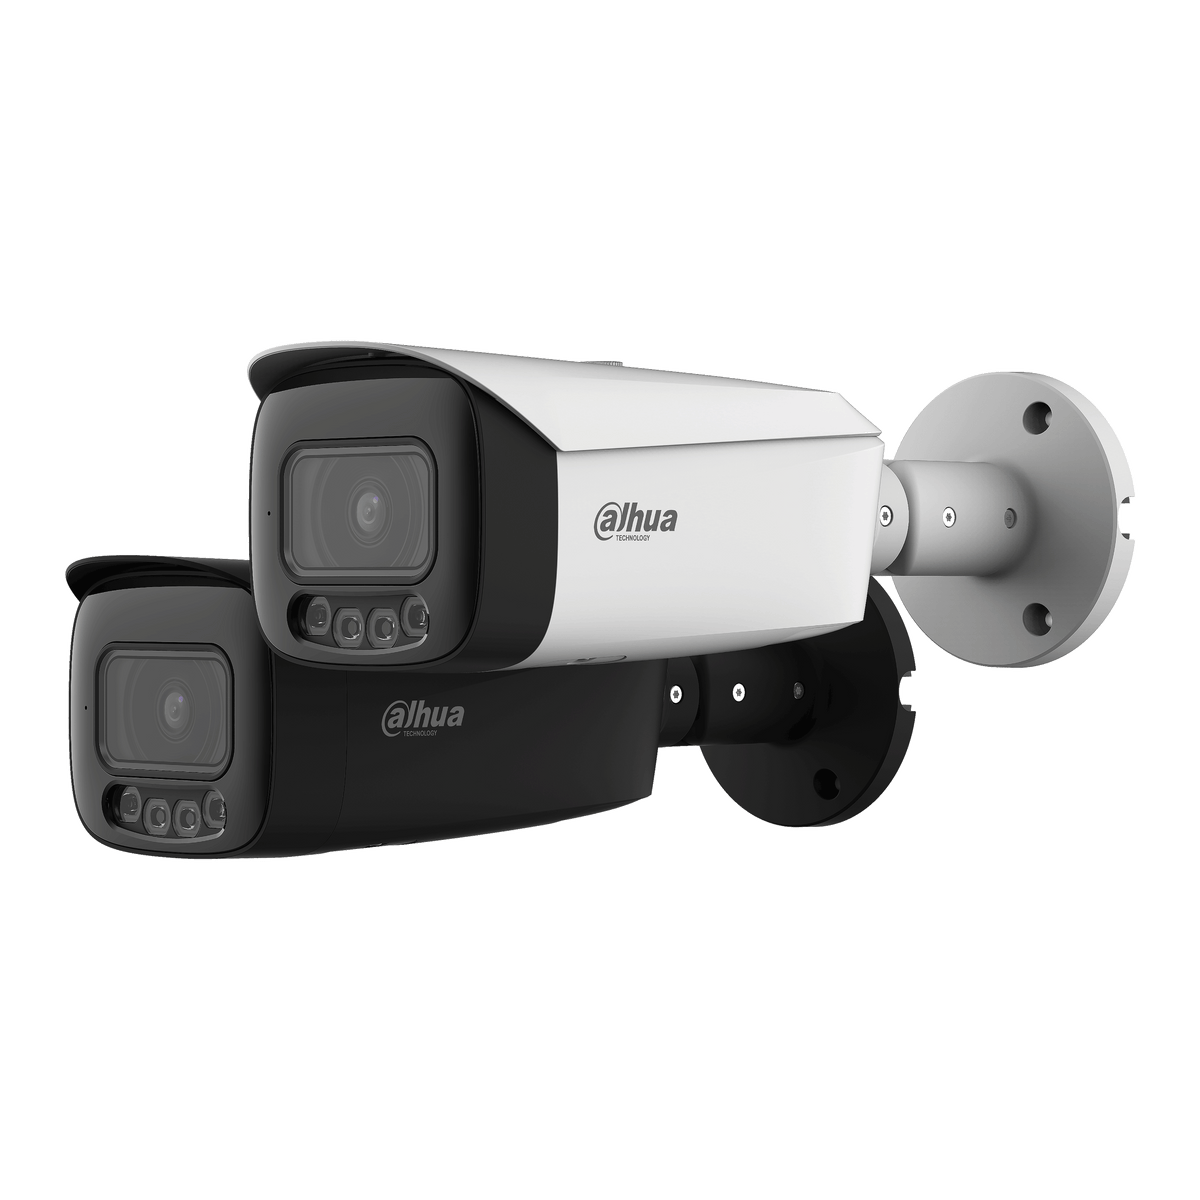 DAHUA IPC-HFW3249T1-AS-PV 2MP Full-color Active Deterrence Fixed-focal Bullet WizSense Network Camera